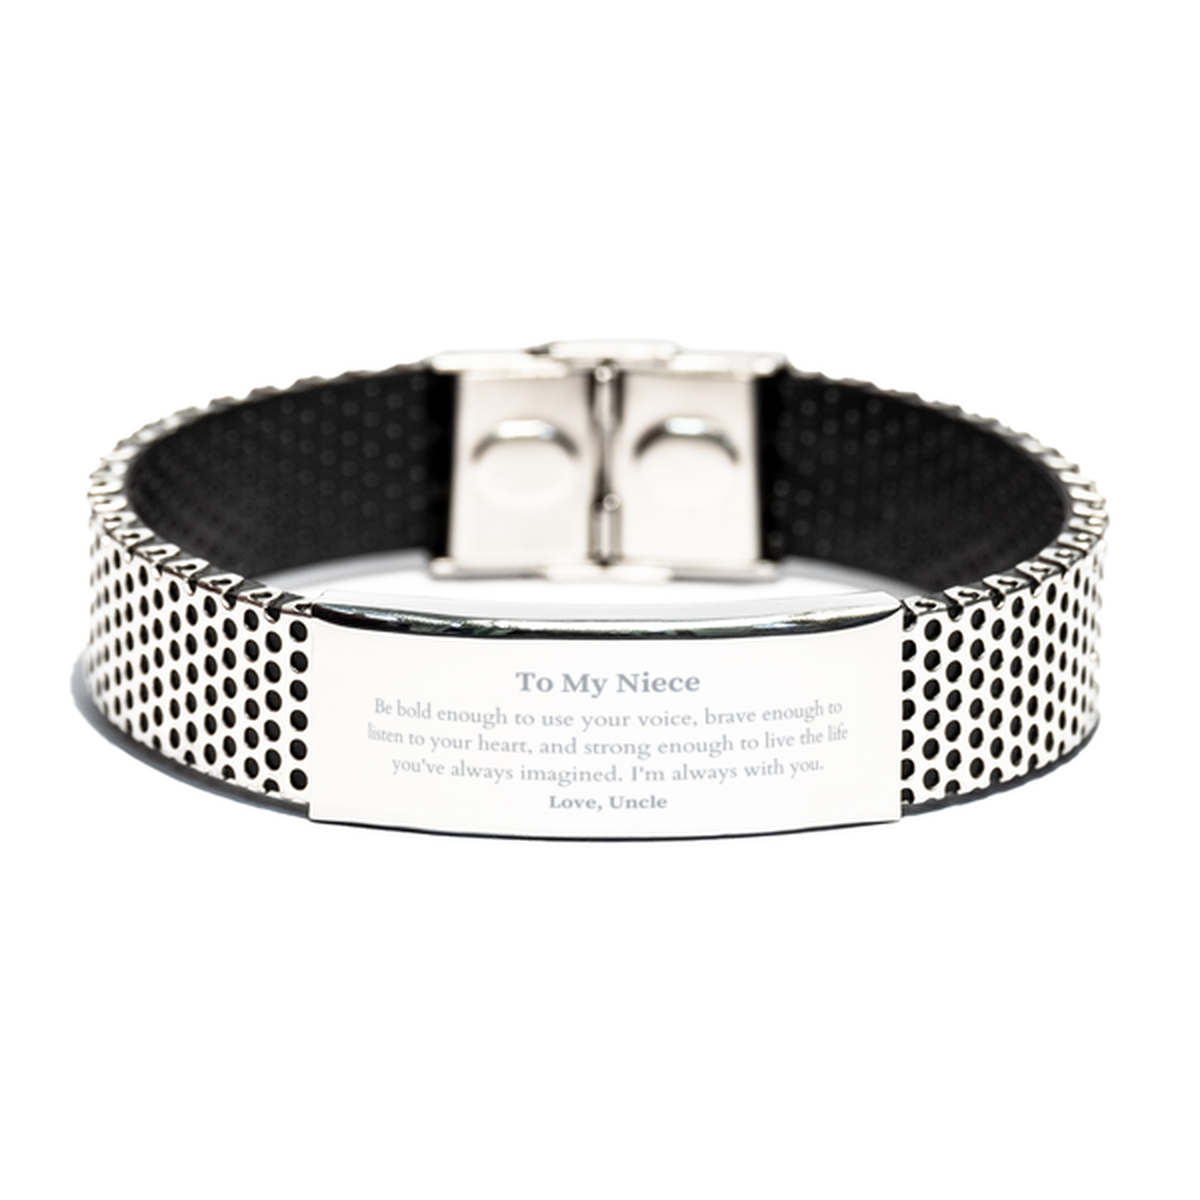 Keepsake Niece Stainless Steel Bracelet Gift Idea Graduation Christmas Birthday Niece from Uncle, Niece Be bold enough to use your voice, brave enough to listen to your heart. Love, Uncle